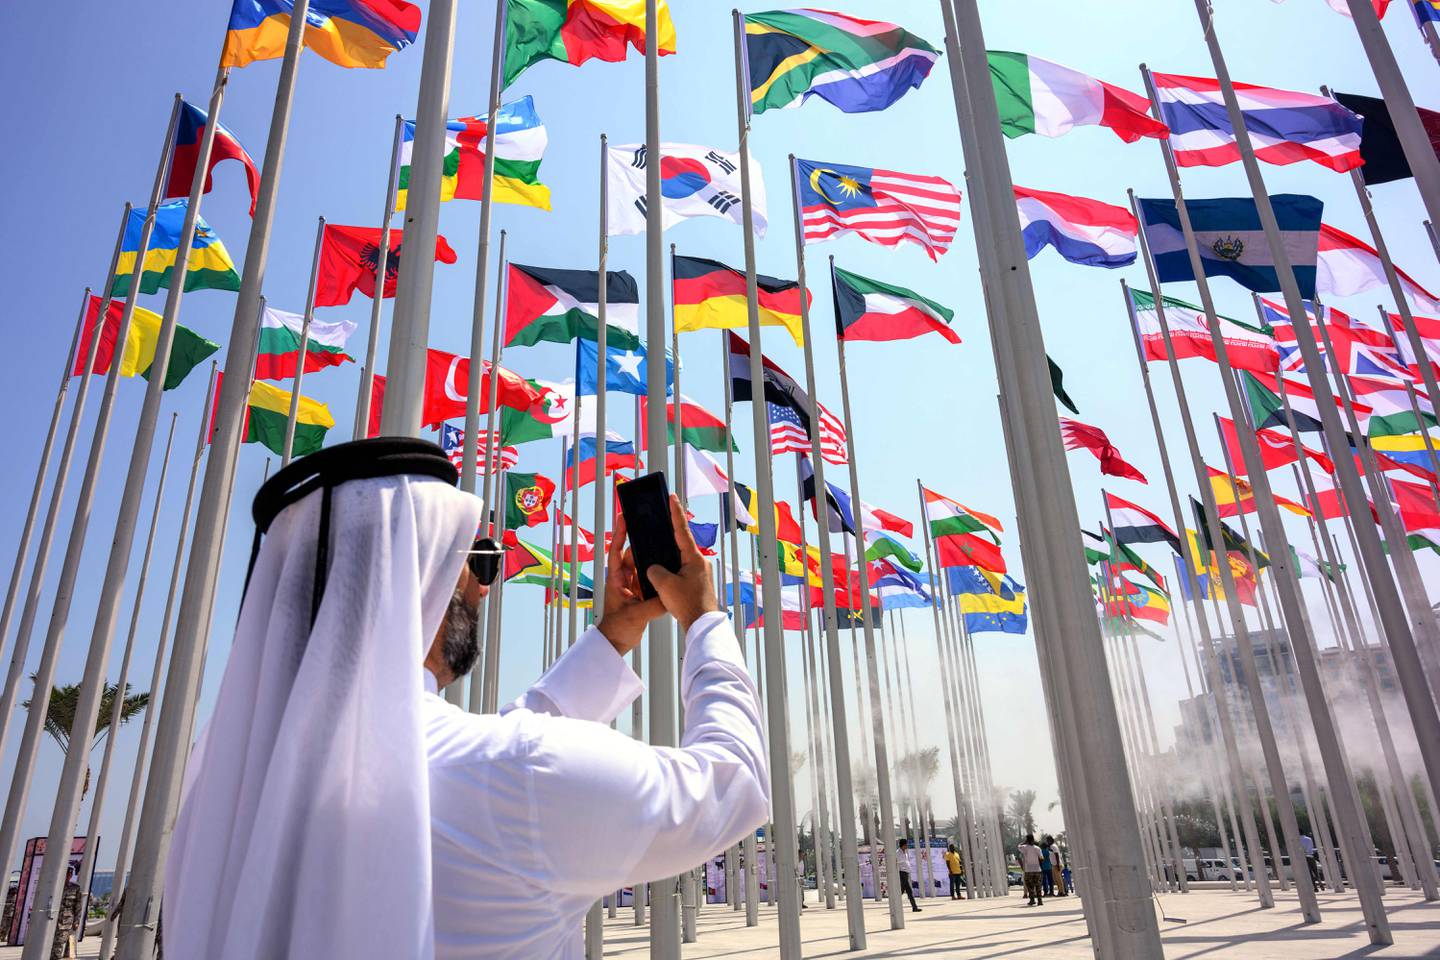 The recently inaugurated Flag Plaza in Doha, Qatar. AFP